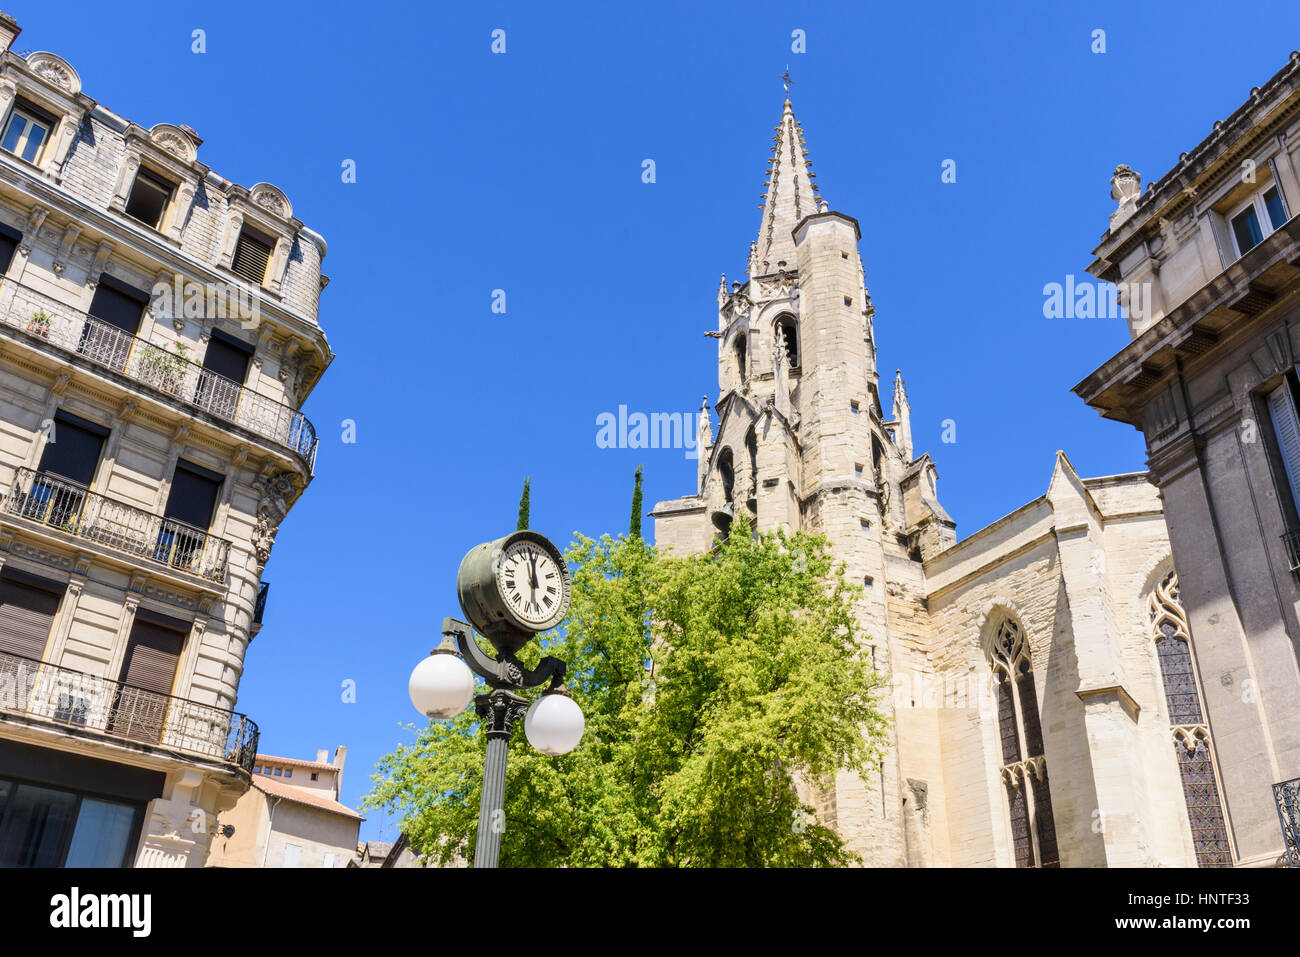 Basilique Saint-Pierre and old street light with clock in Place Carnot, Avignon, France Stock Photo